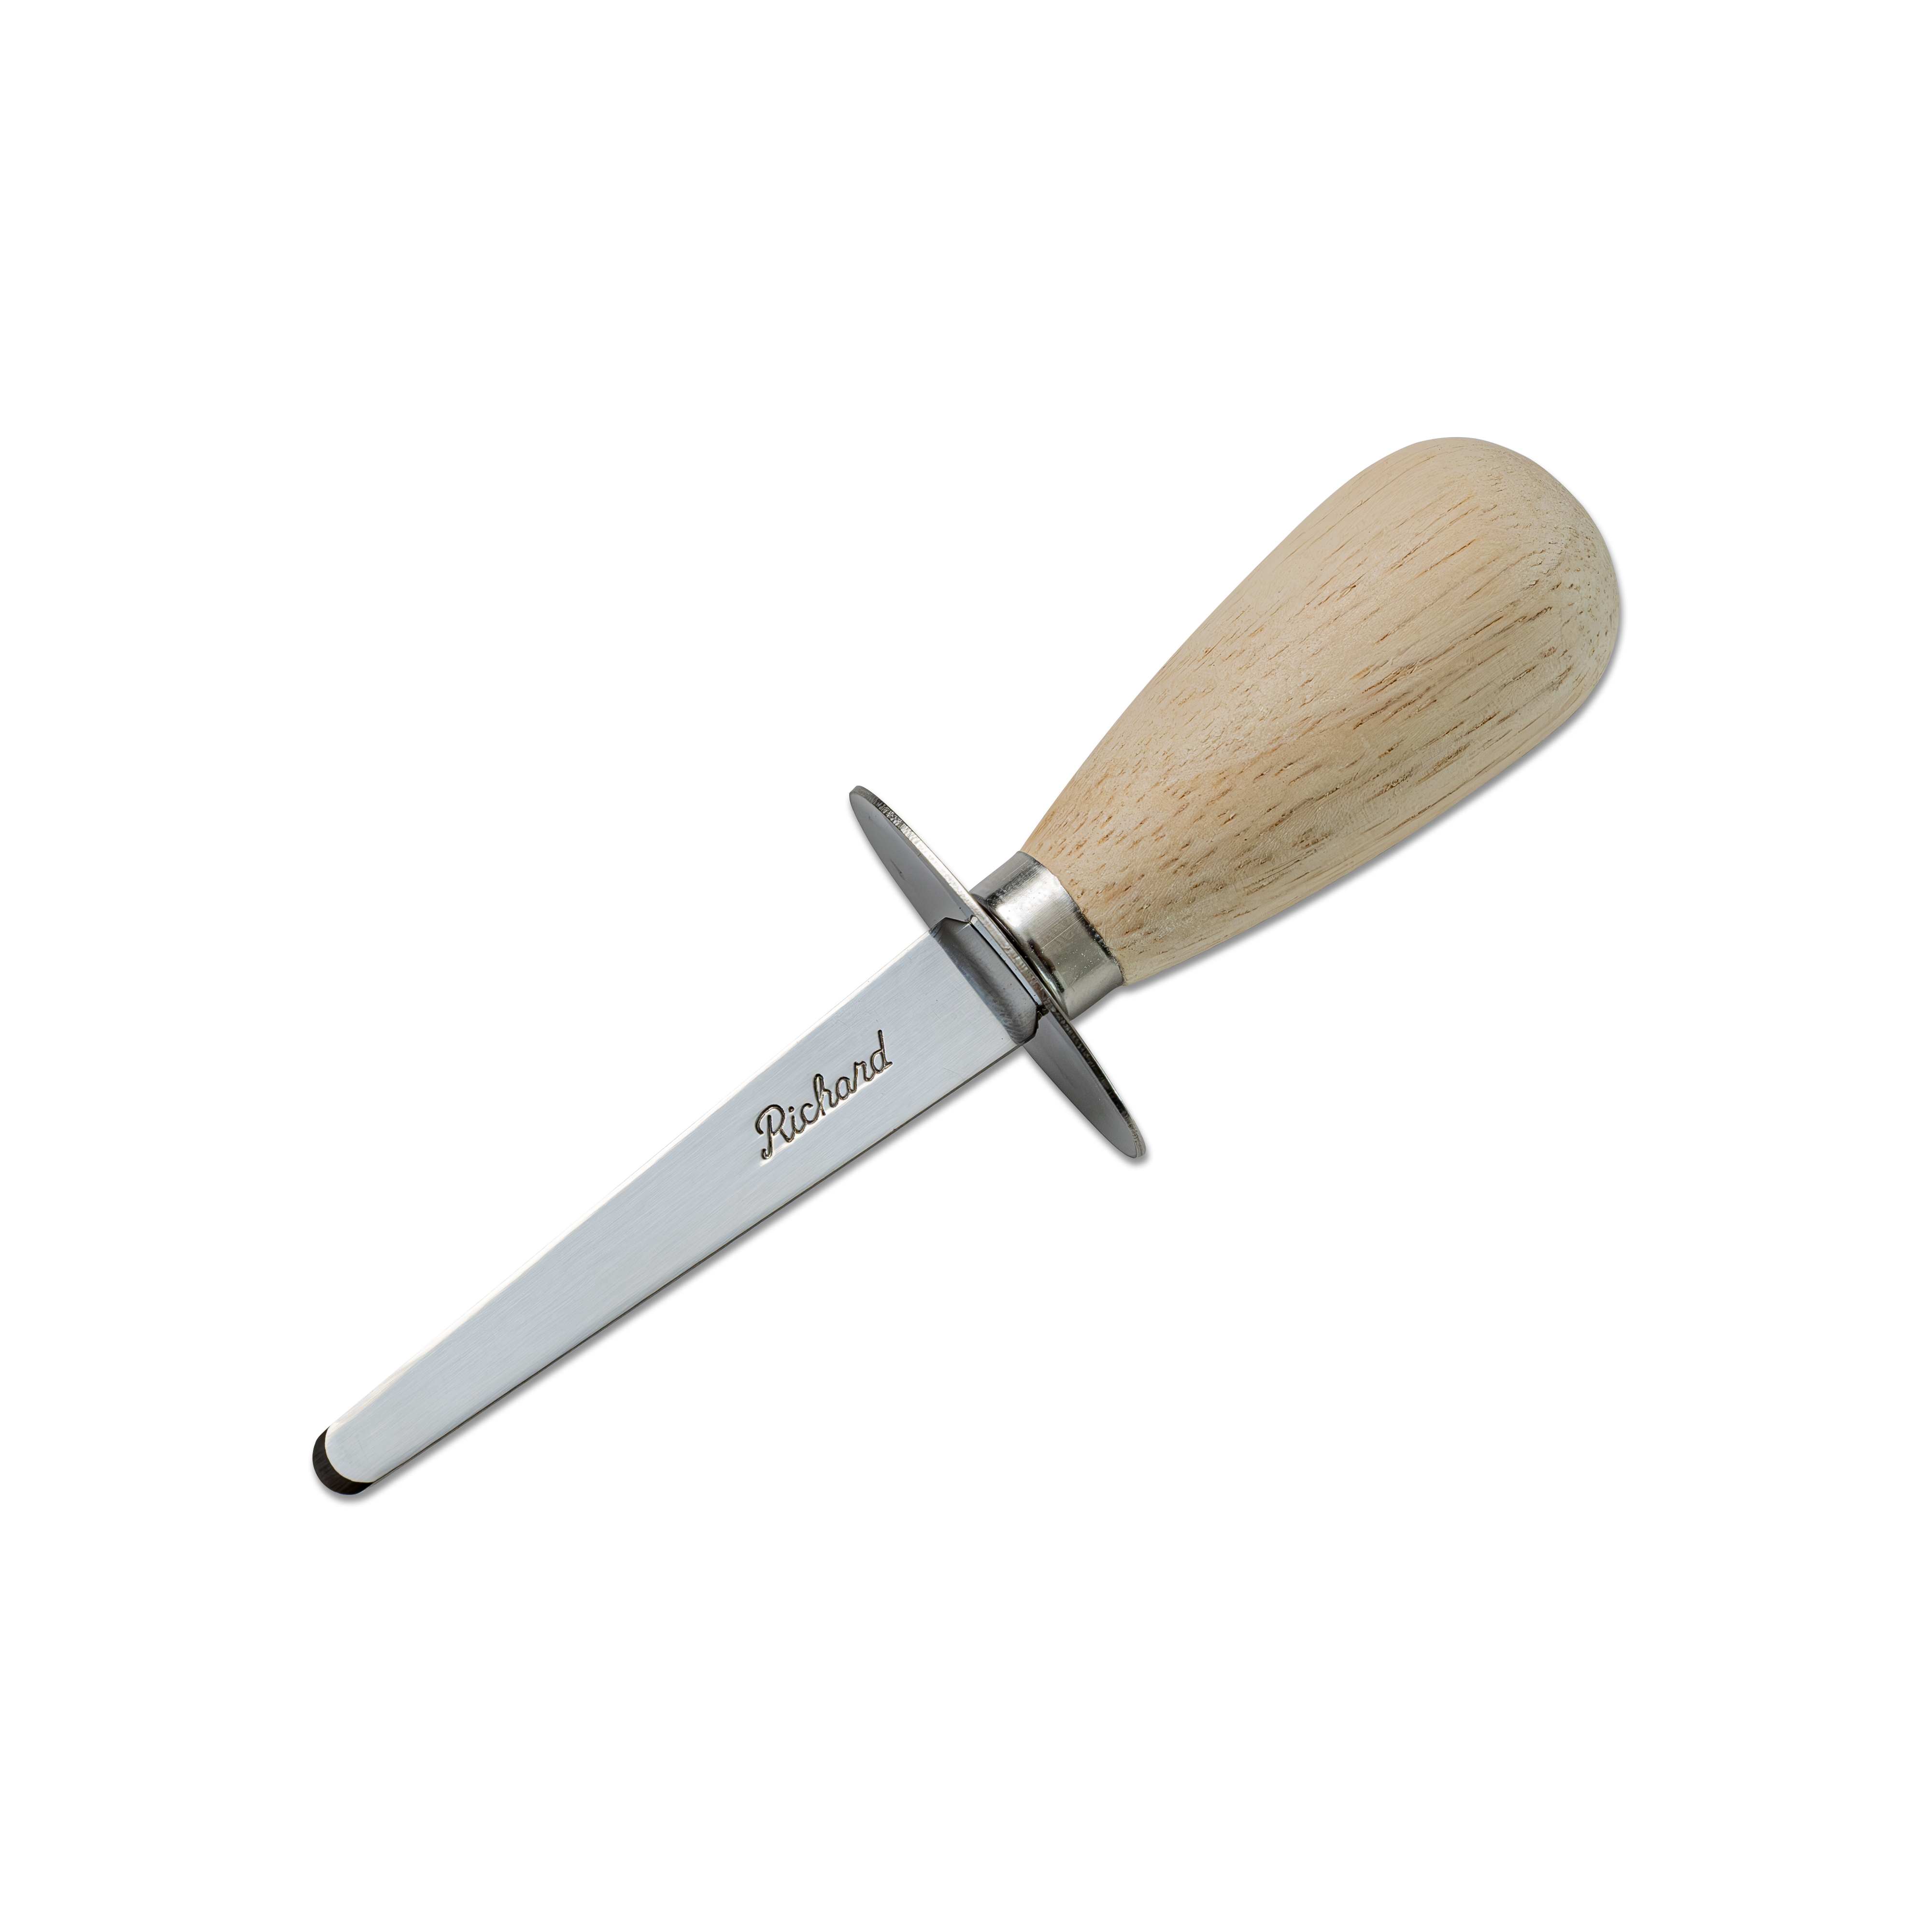 Oyster Knife 6" with Guard